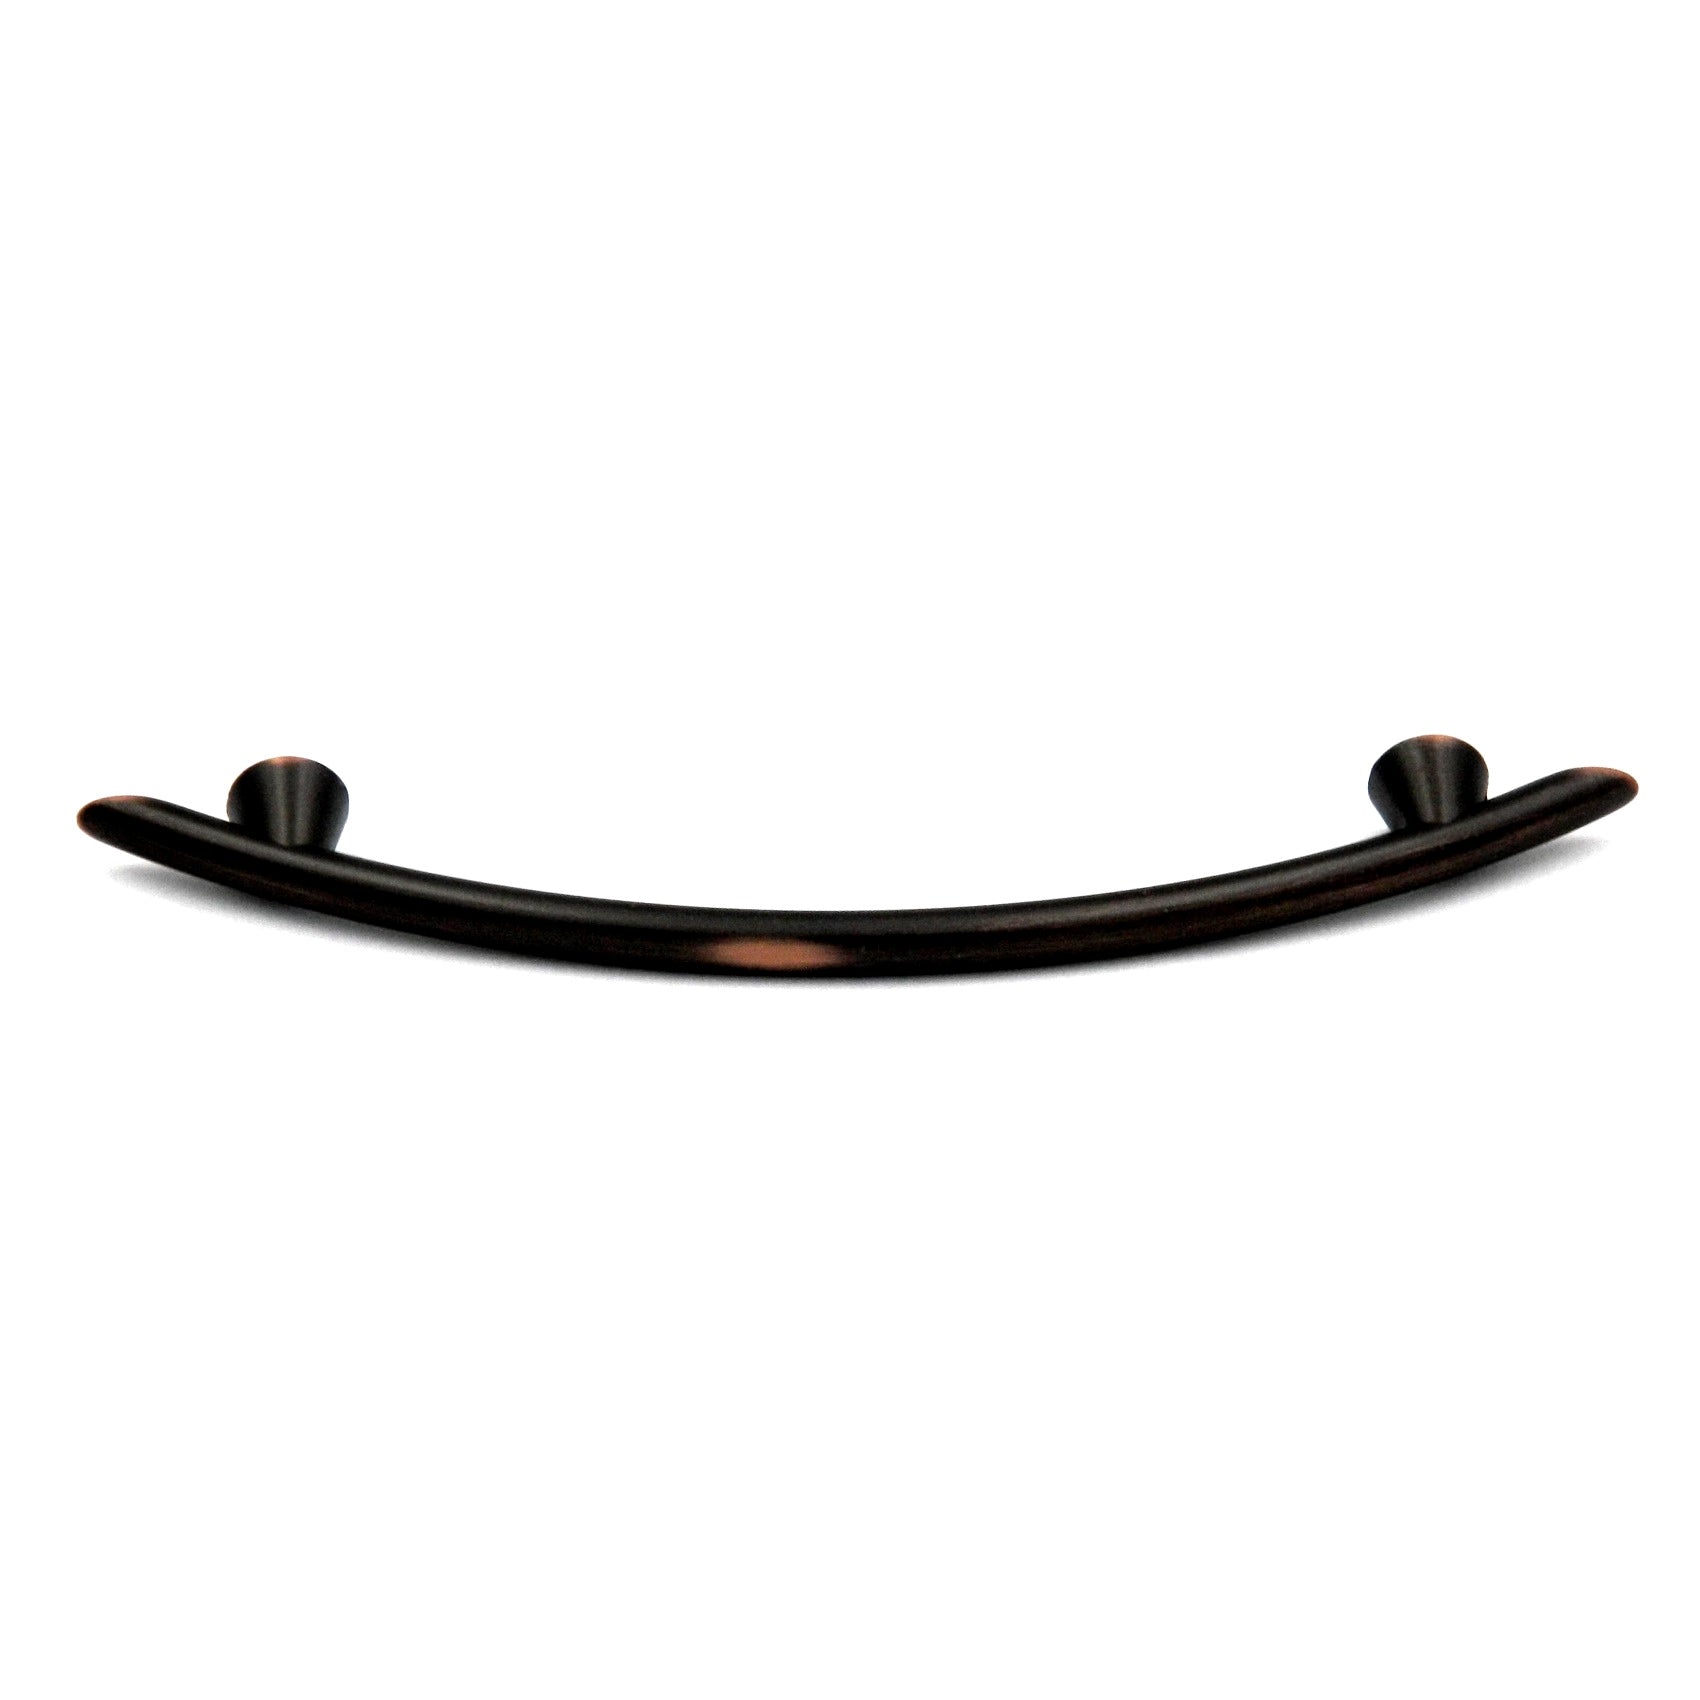 10 Pack Hickory Metropolis P2922-OBH Oil Rubbed Bronze Highlighted 3 3/4" (96mm)cc Handle Pull